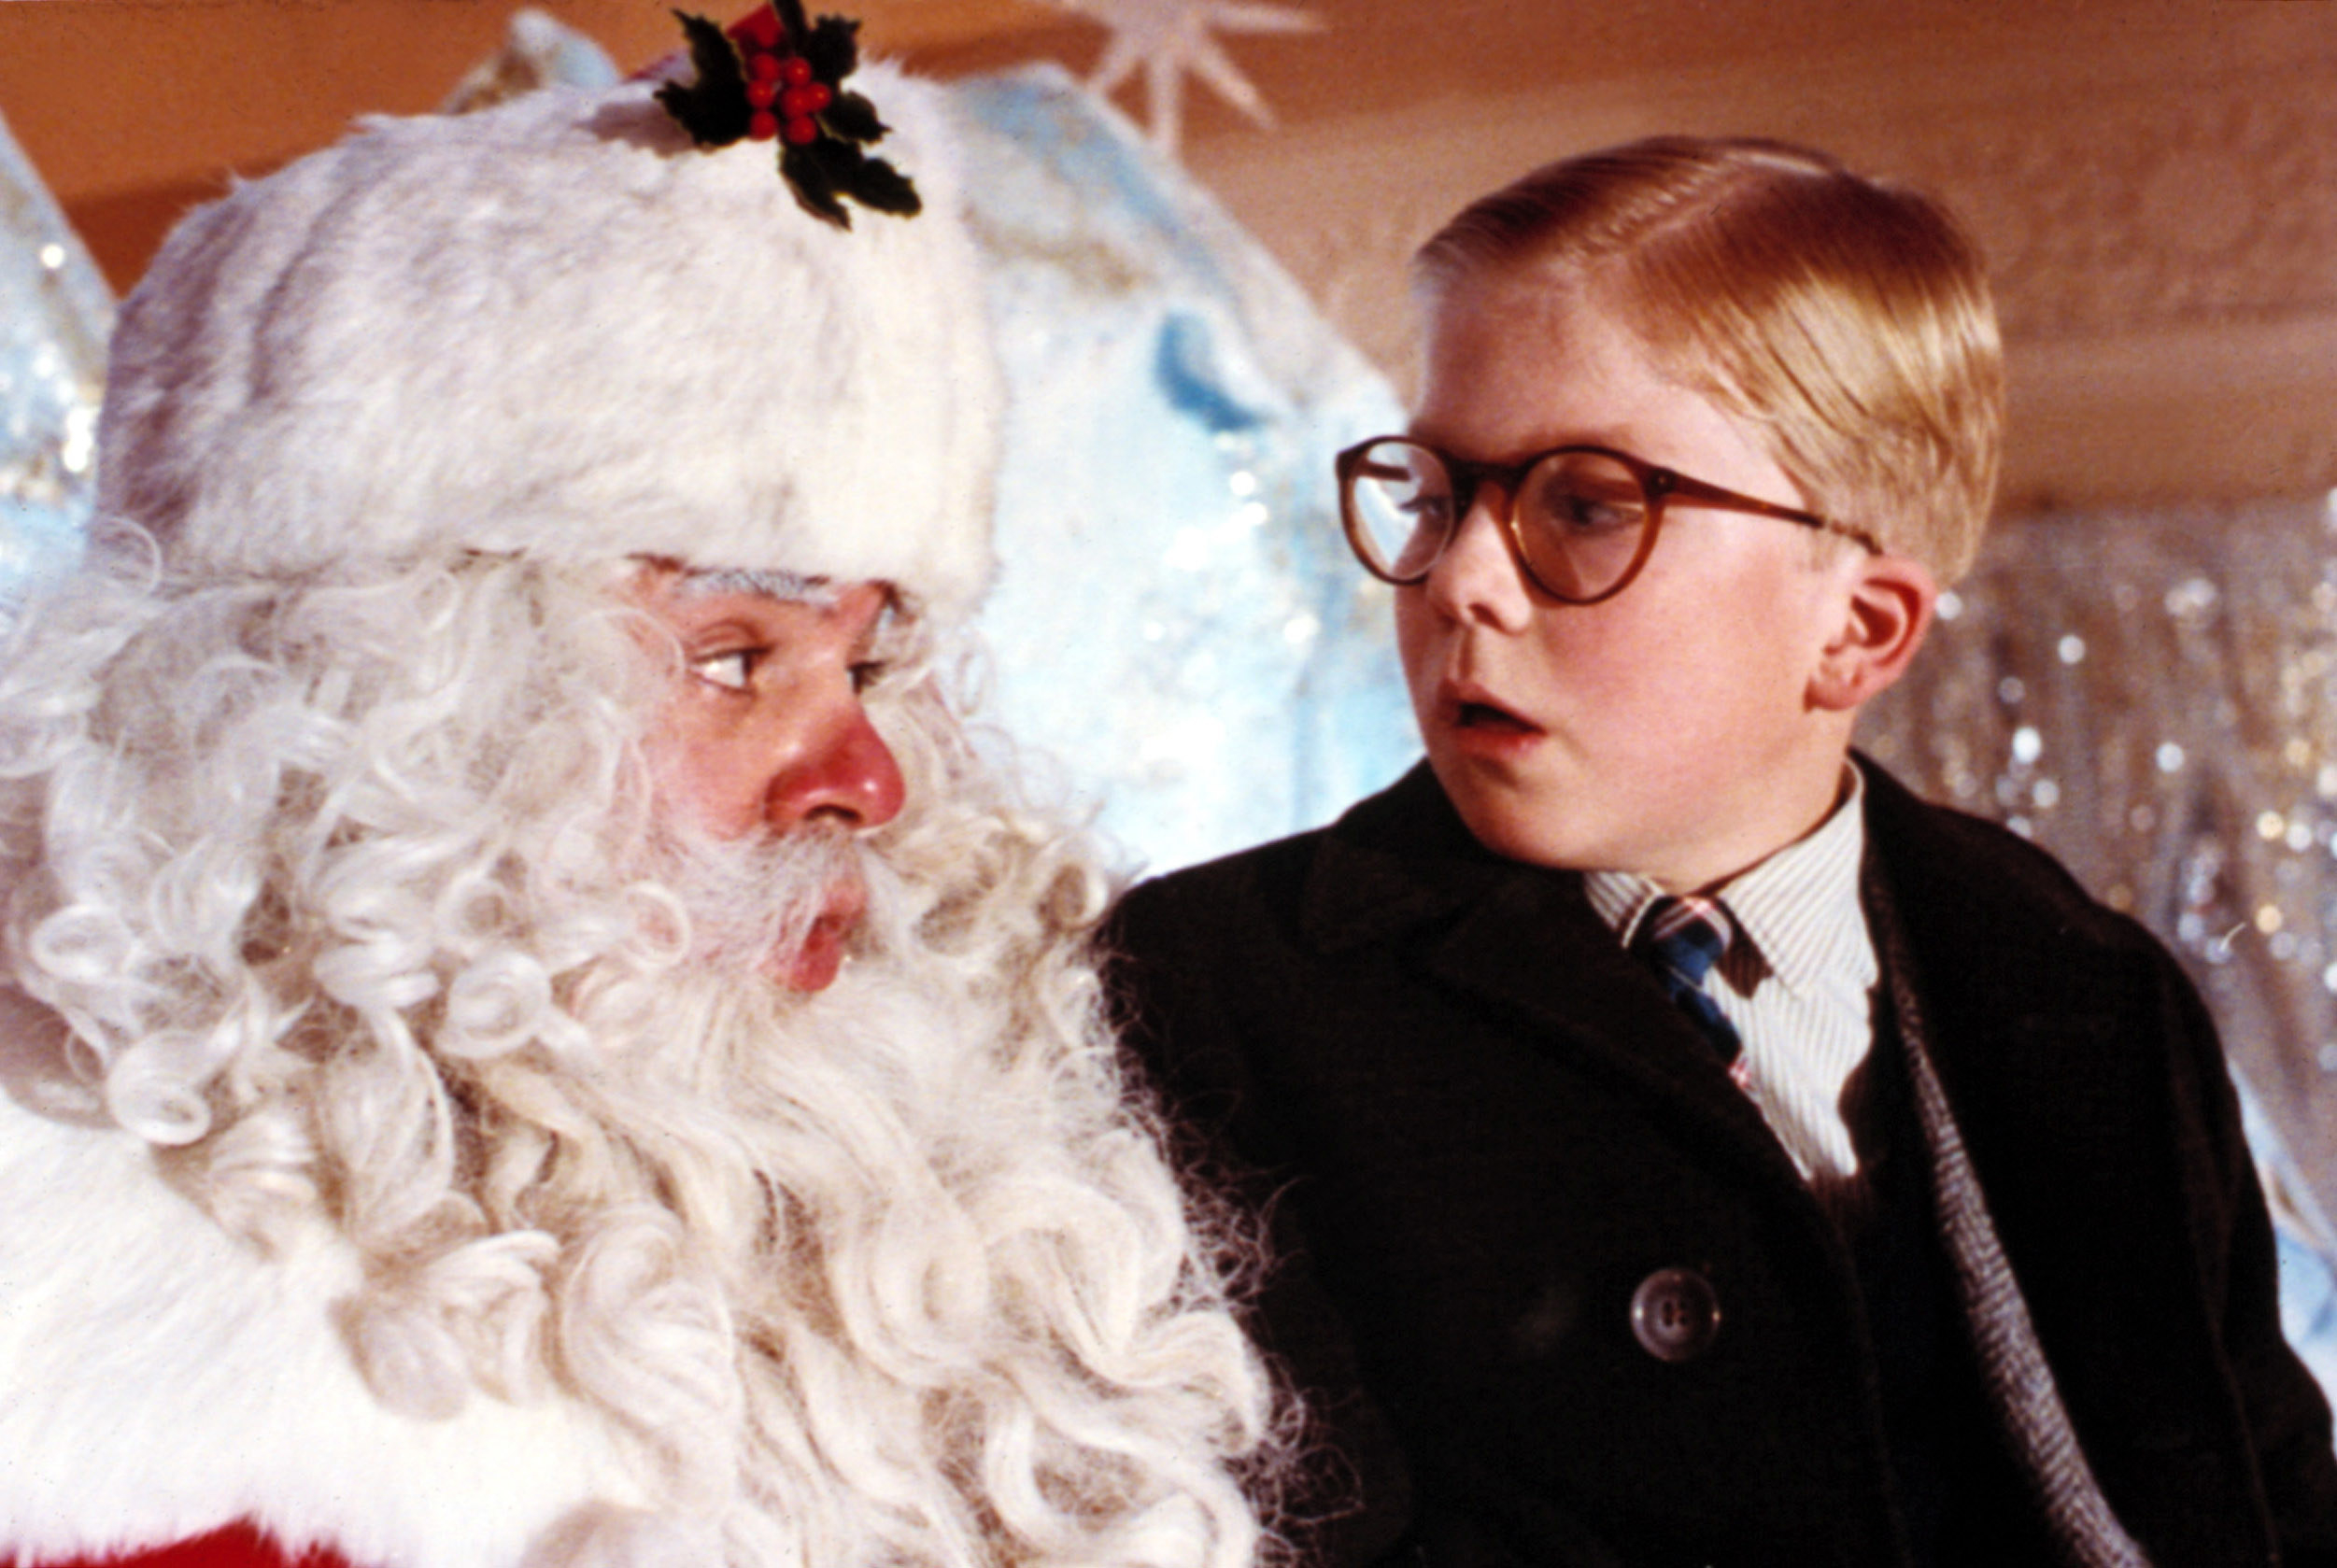 Ralphie looks confused while sitting with Santa in &quot;A Christmas Story&quot;